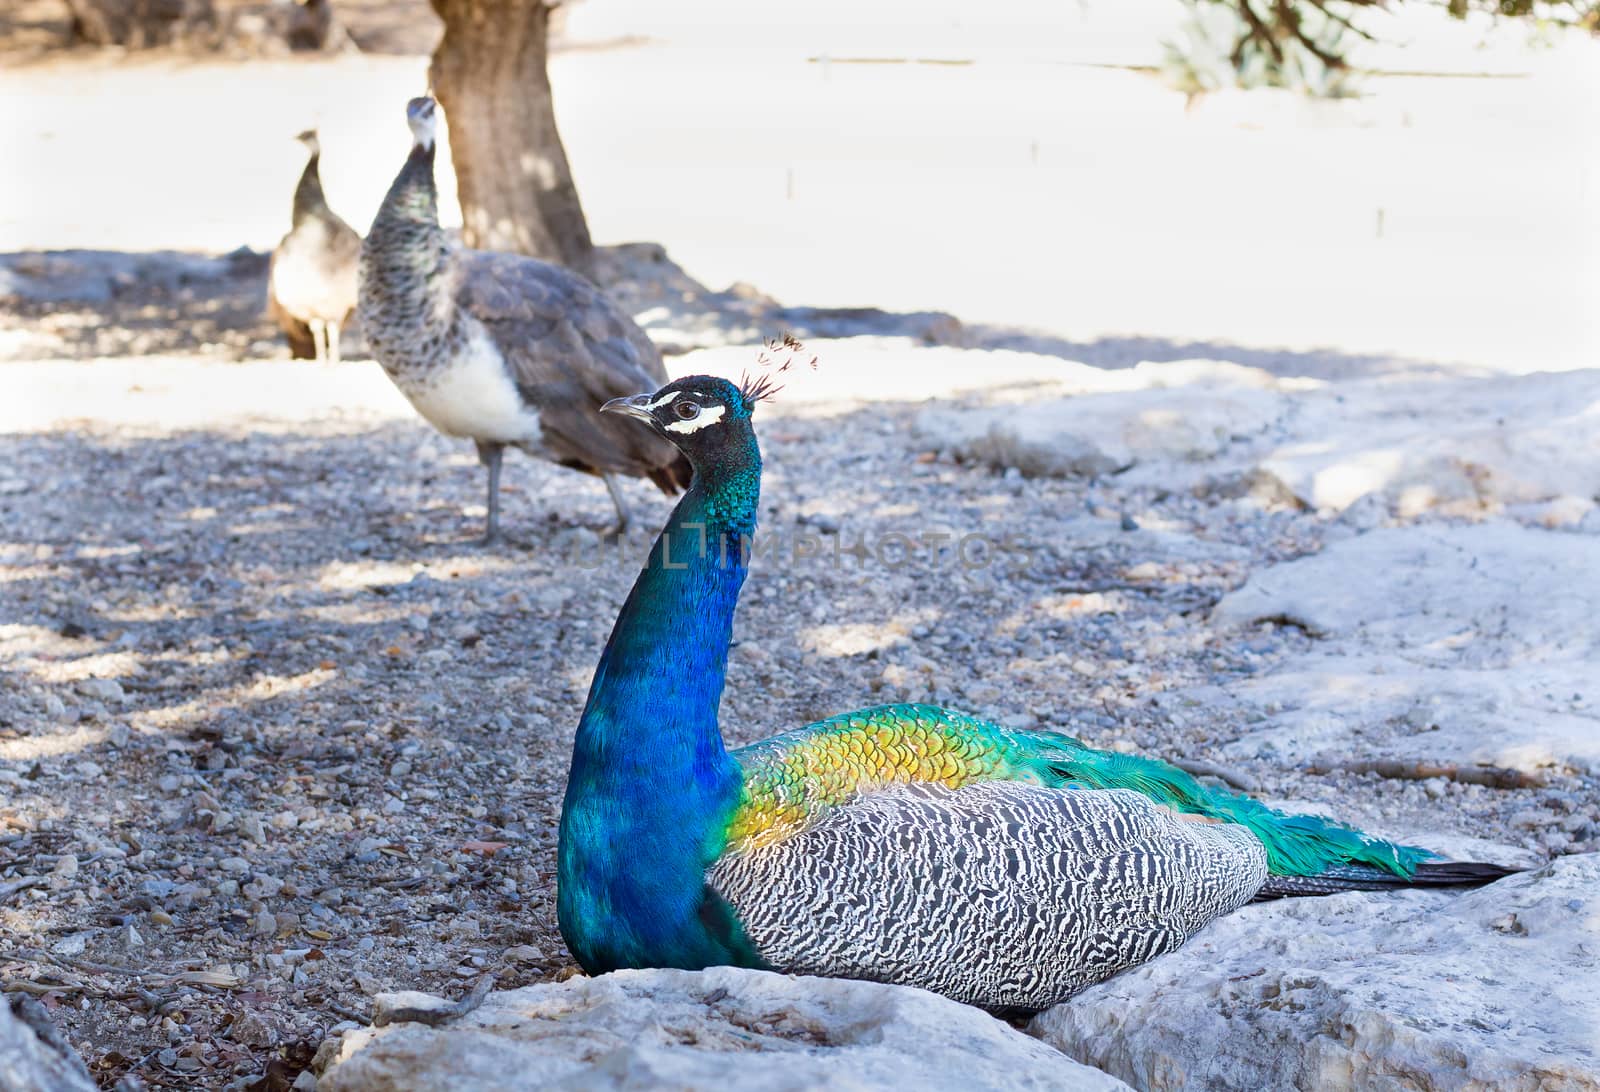 Colourful blue multicolored peacock sitting in sandy rocks close up